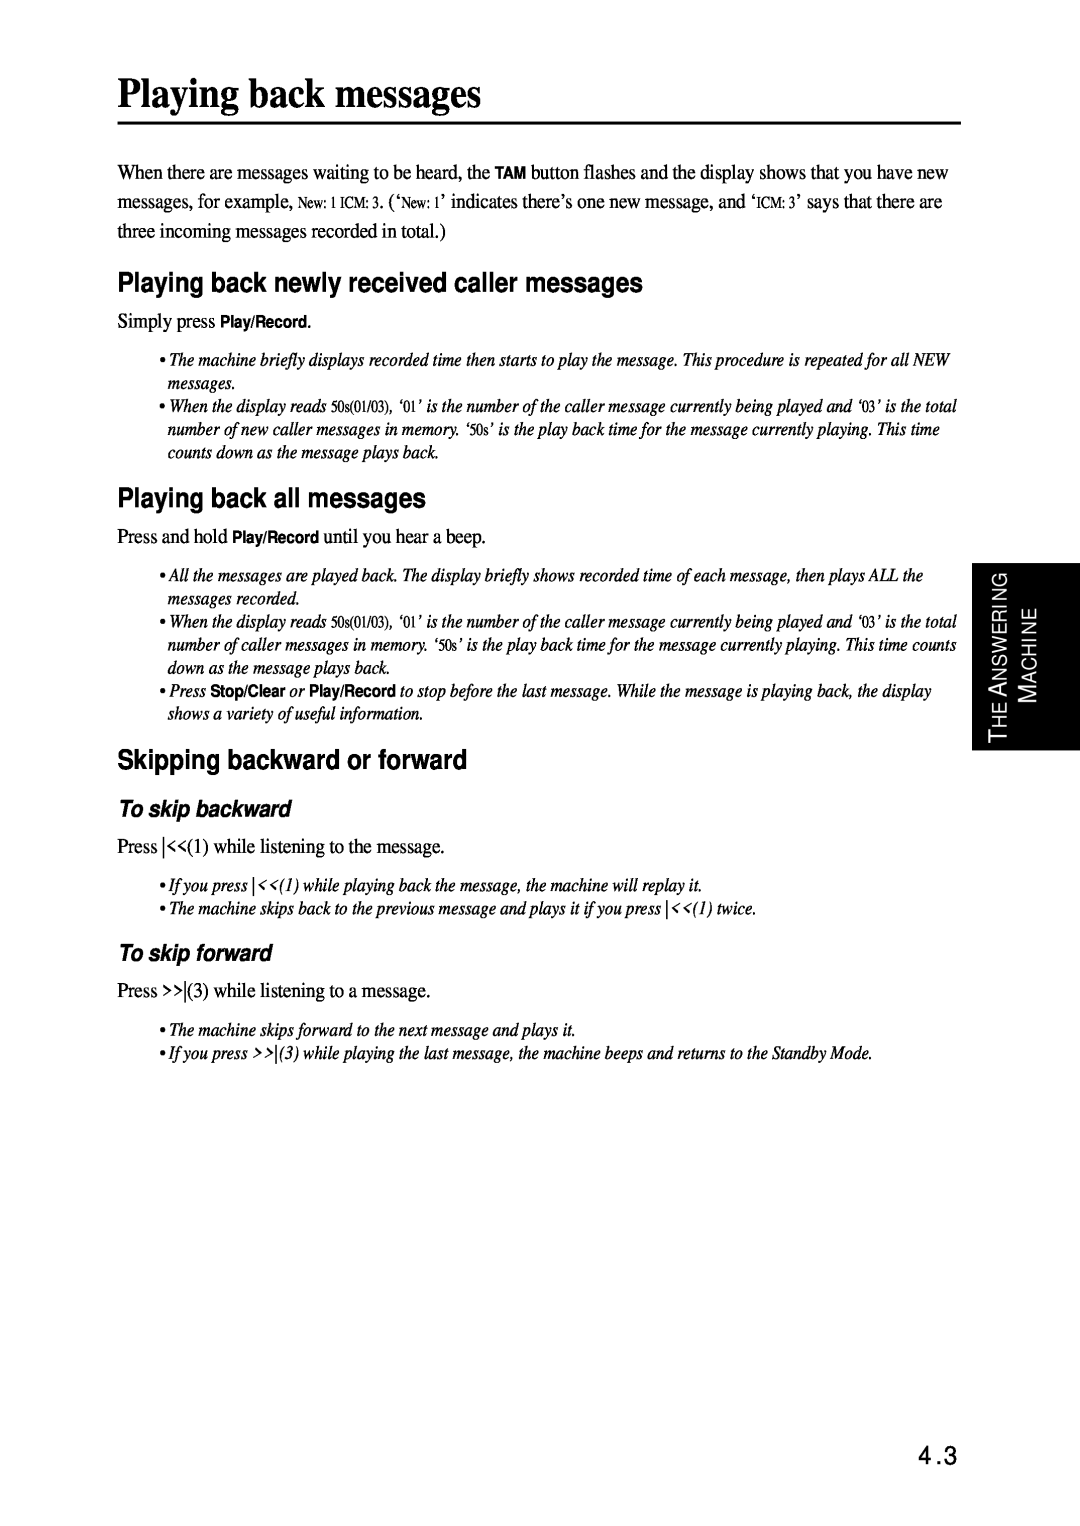 Samsung SF-340 Series manual Playing back messages, Playing back newly received caller messages, Playing back all messages 